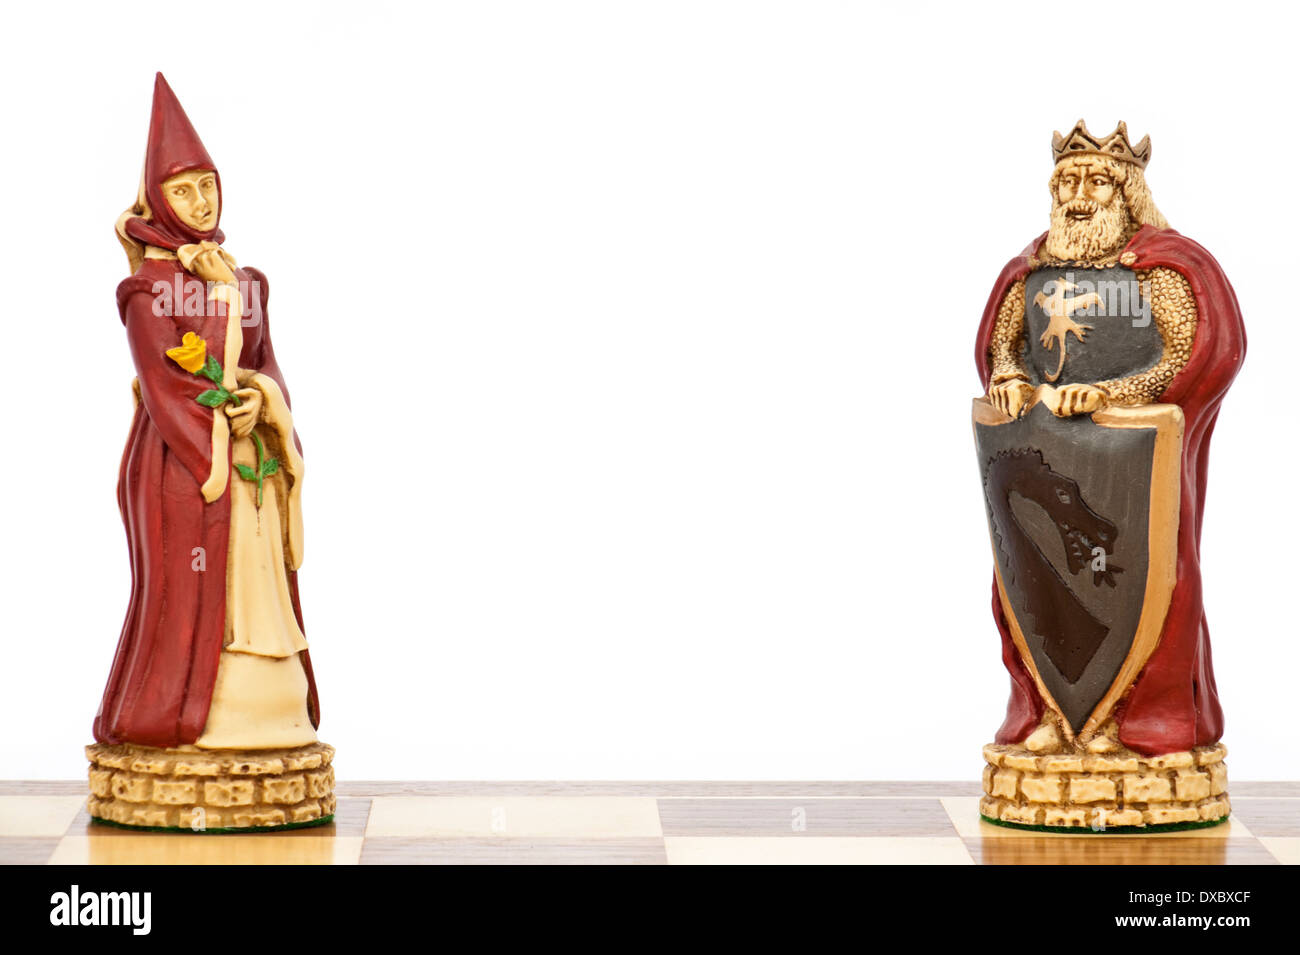 Luxury 'King Arthur and Queen Guinevere' themed chess set by Connoisseur Games Stock Photo